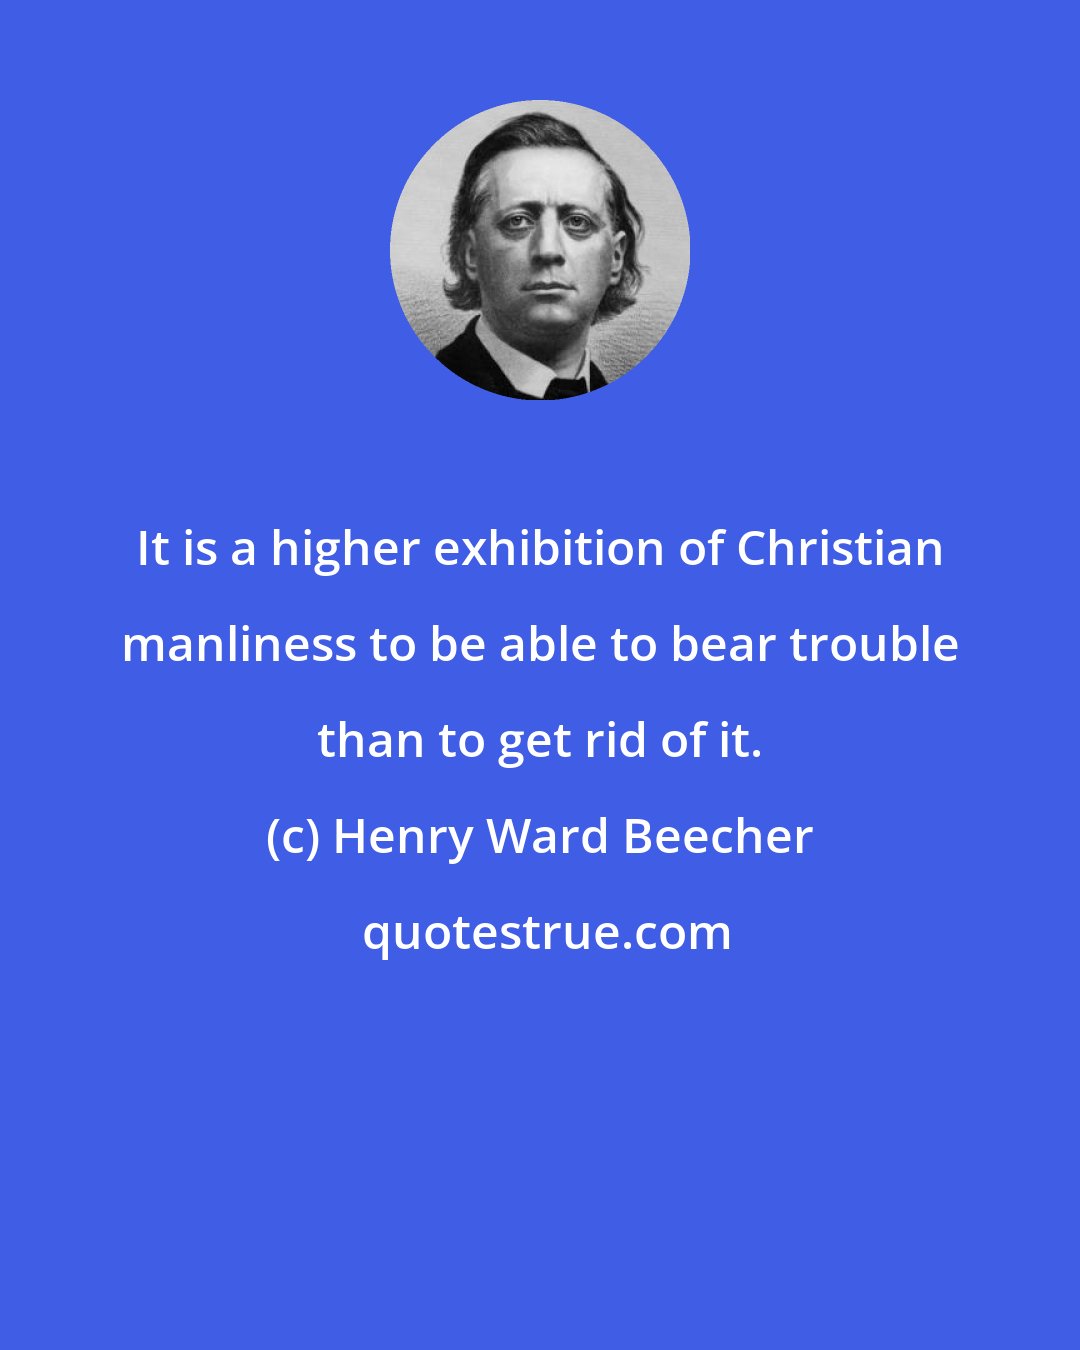 Henry Ward Beecher: It is a higher exhibition of Christian manliness to be able to bear trouble than to get rid of it.